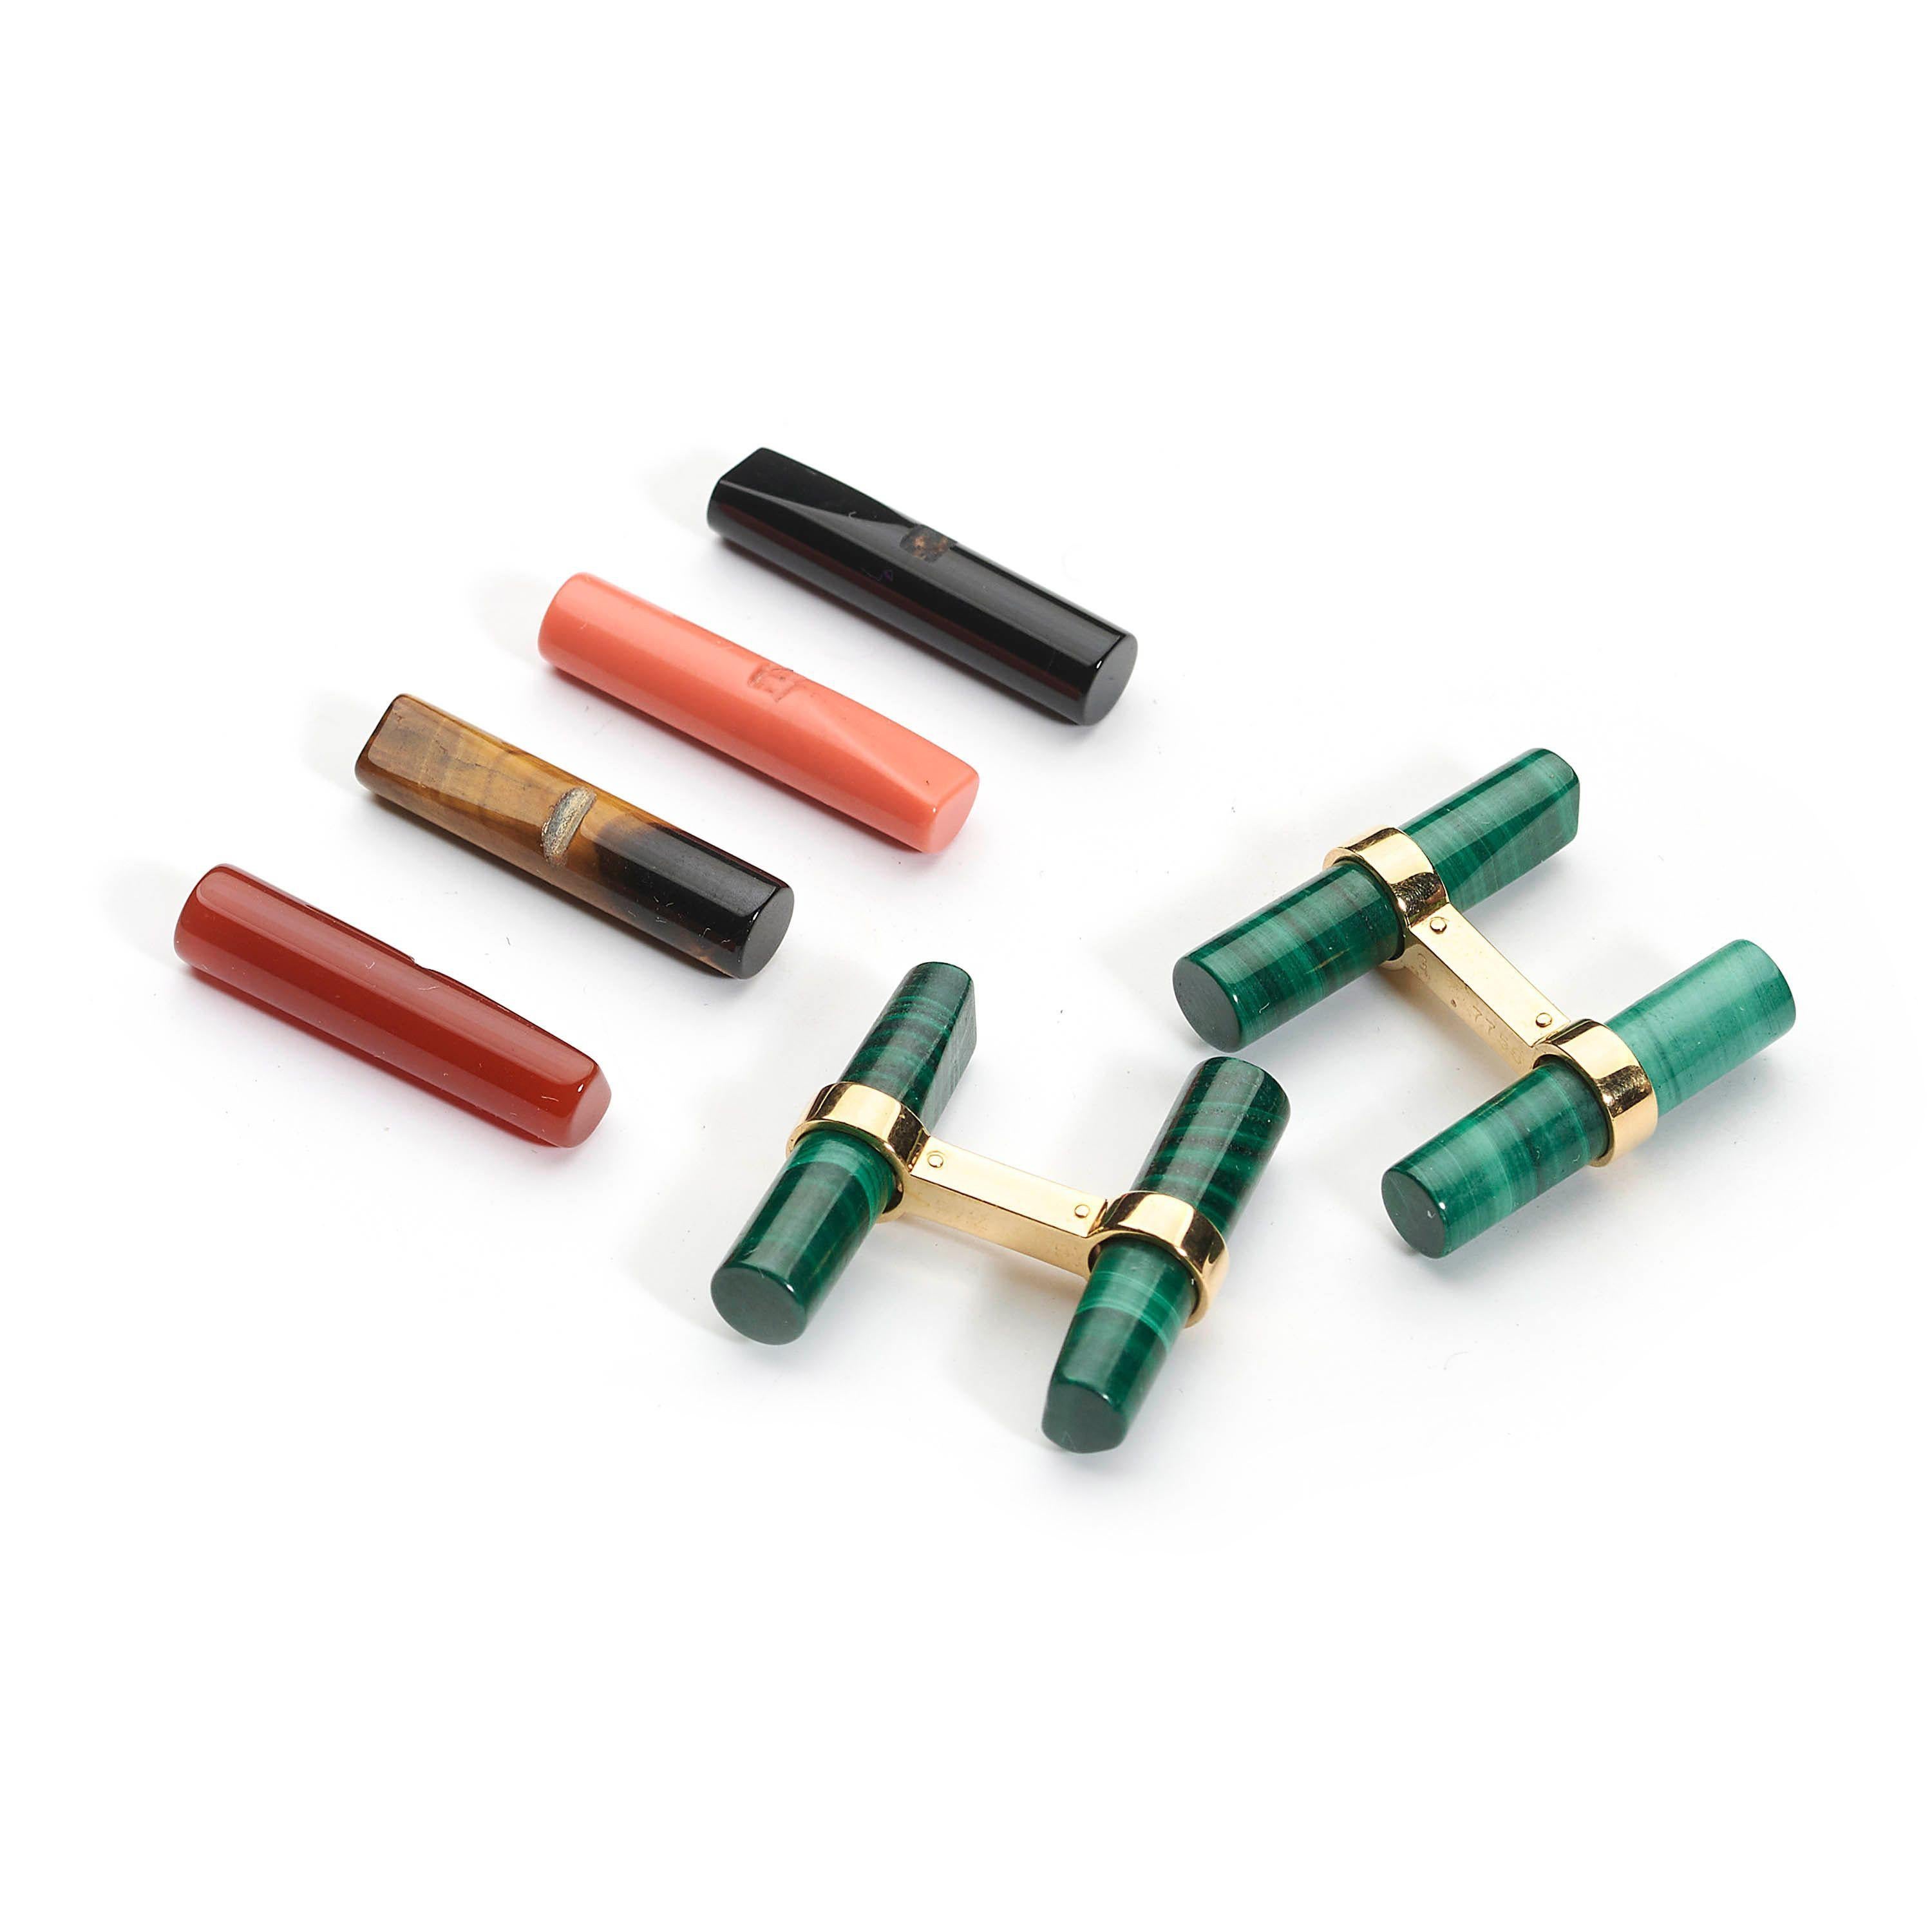 A Cartier Paris multi gemstone baton cufflink set, with interchangeable bars or batons, consisting of malachite, black onyx, coral, tiger eye and cornelian, with a pair of cufflink mounts, in 18ct yellow gold, signed Cartier, stamped 750, numbered G